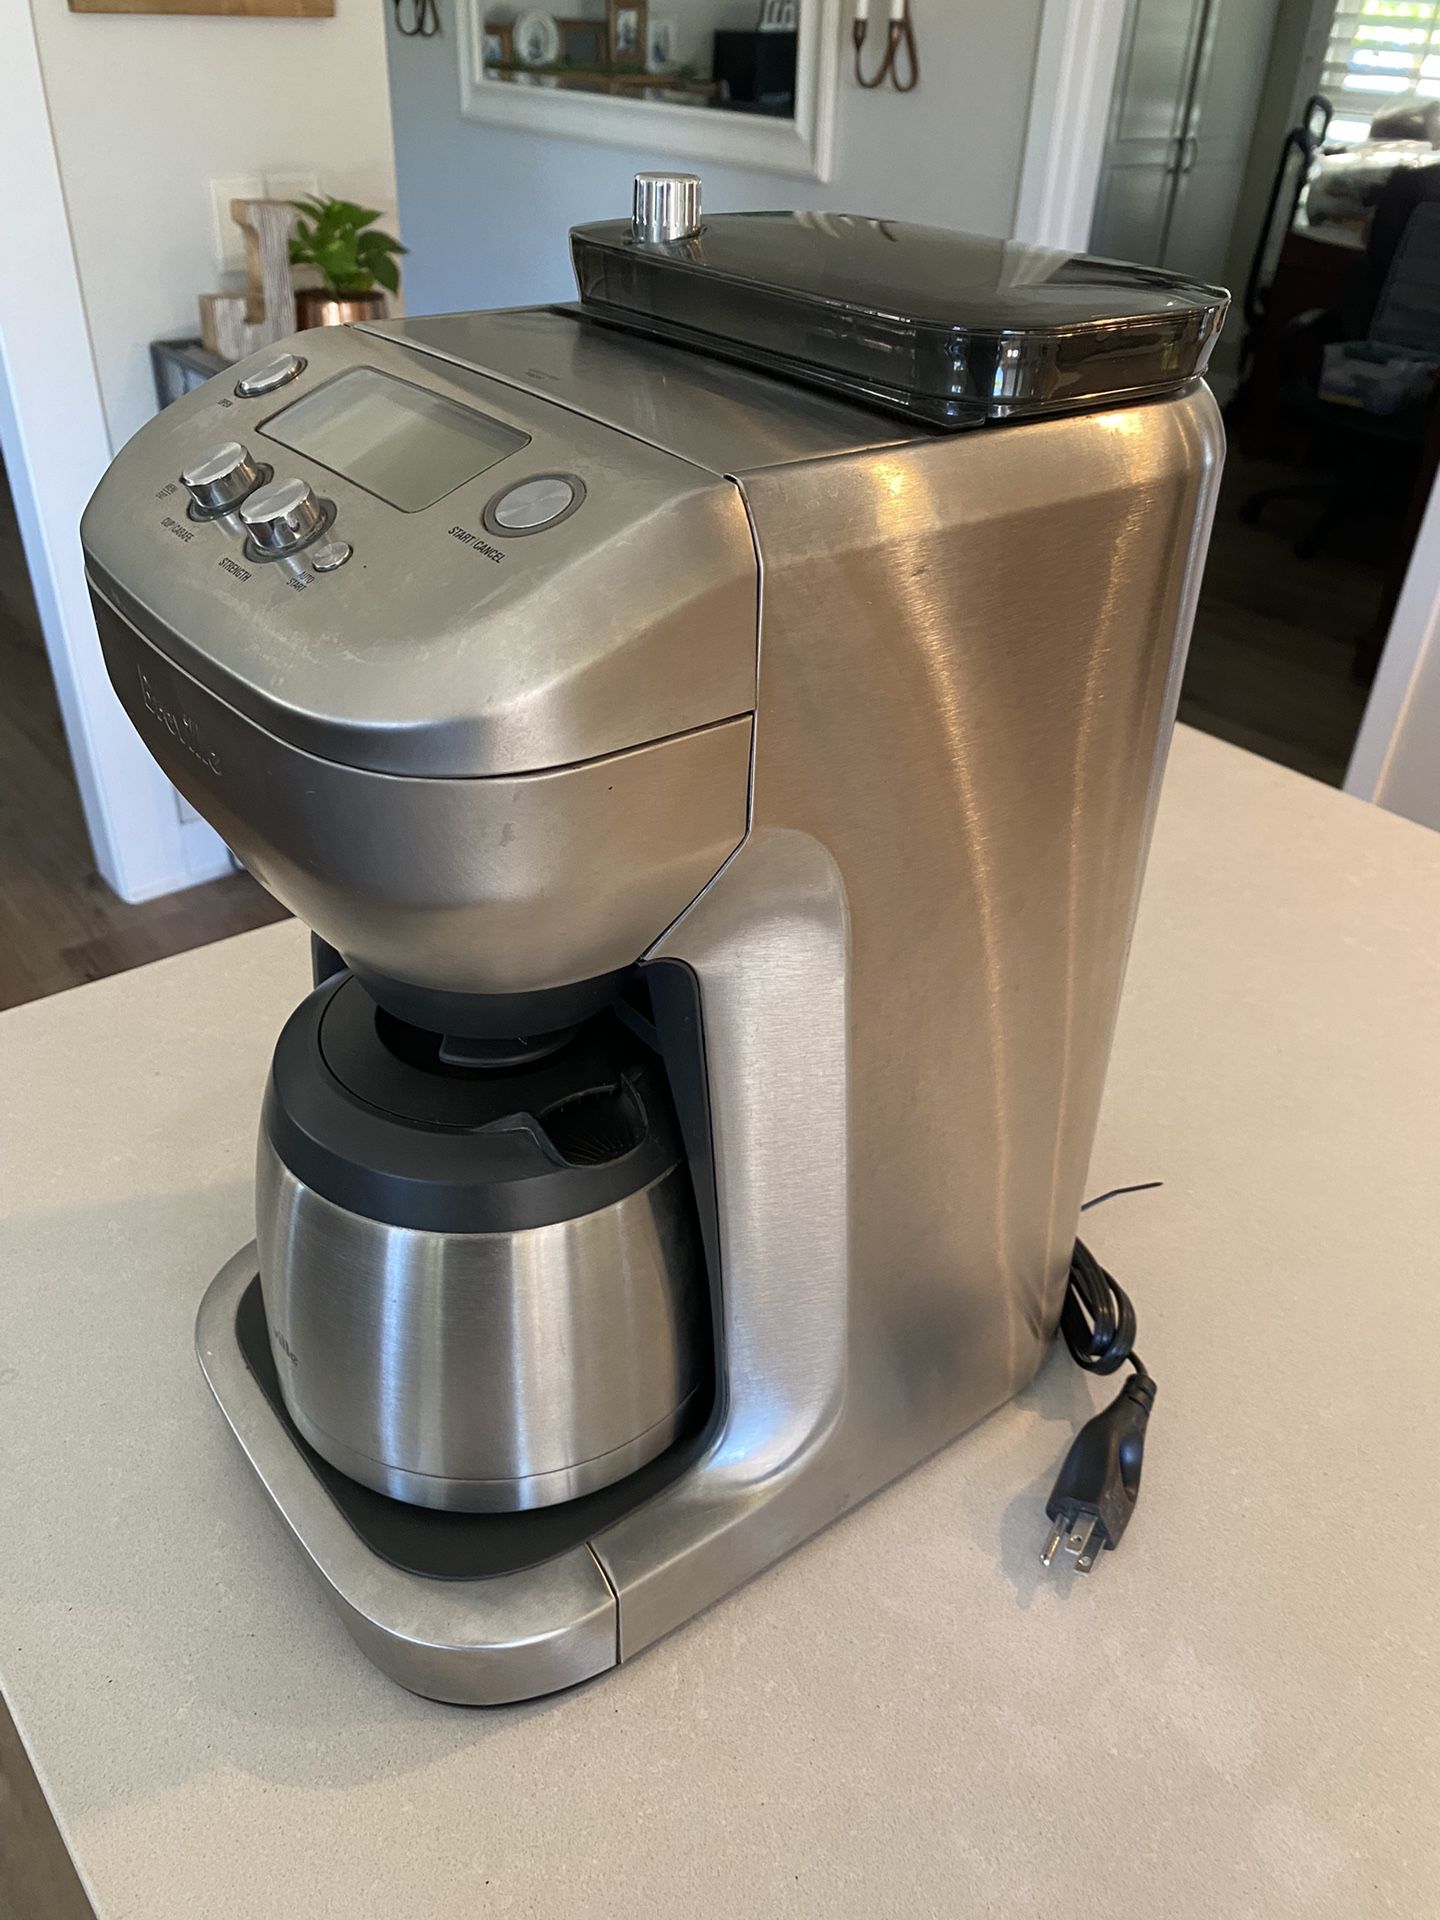 Breville The Grind Control BDC650BSS Coffee Maker Review